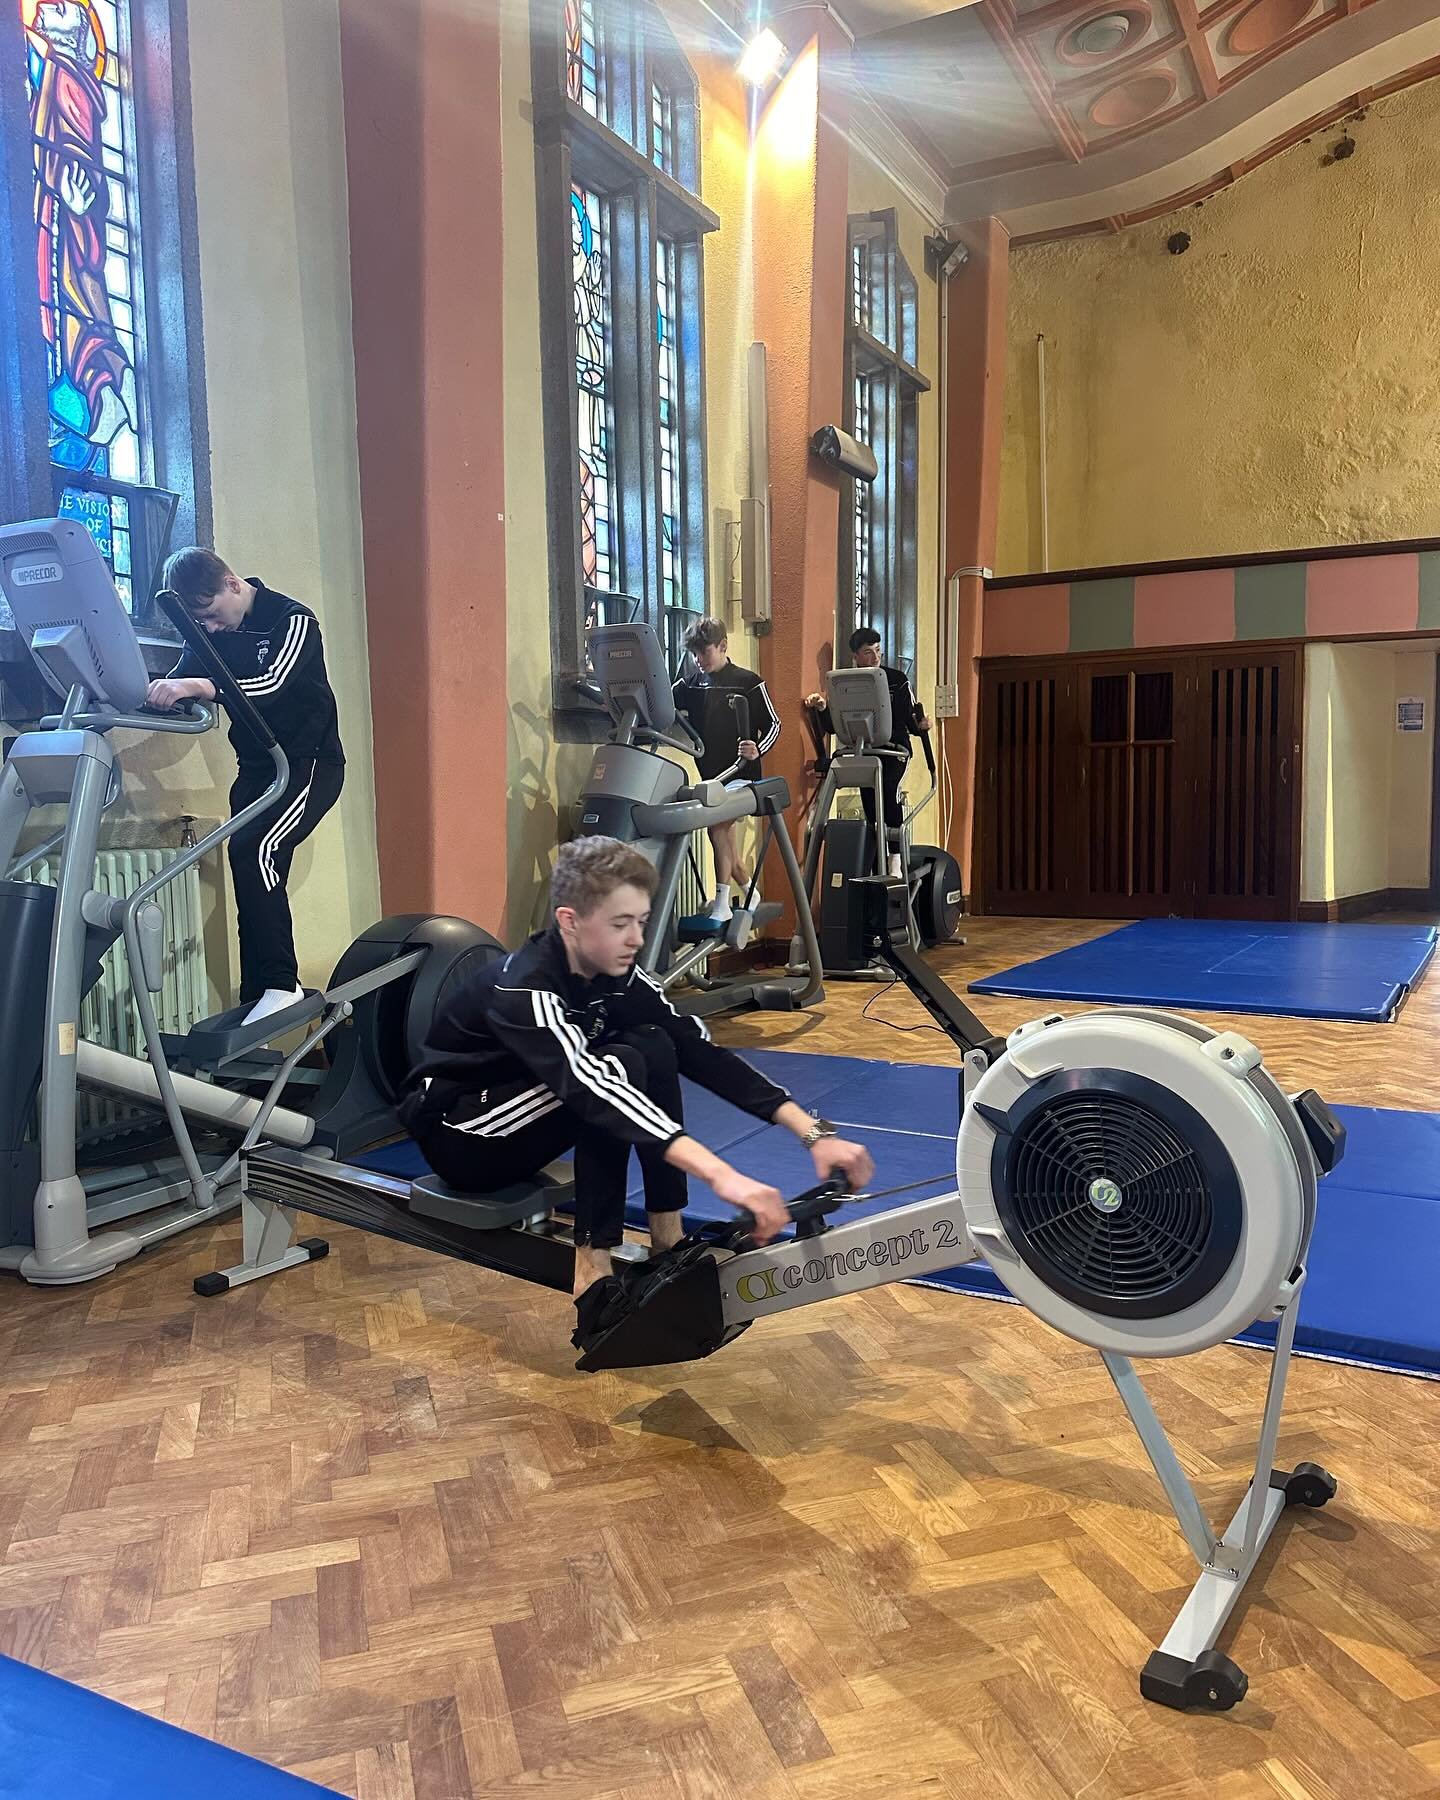 A massive thank you to @gymplus_ireland and Gym Plus Cork for donating some cross trainers and a rowing machine to the school! We look forward to putting these new machines to use in our school gym soon! 👏